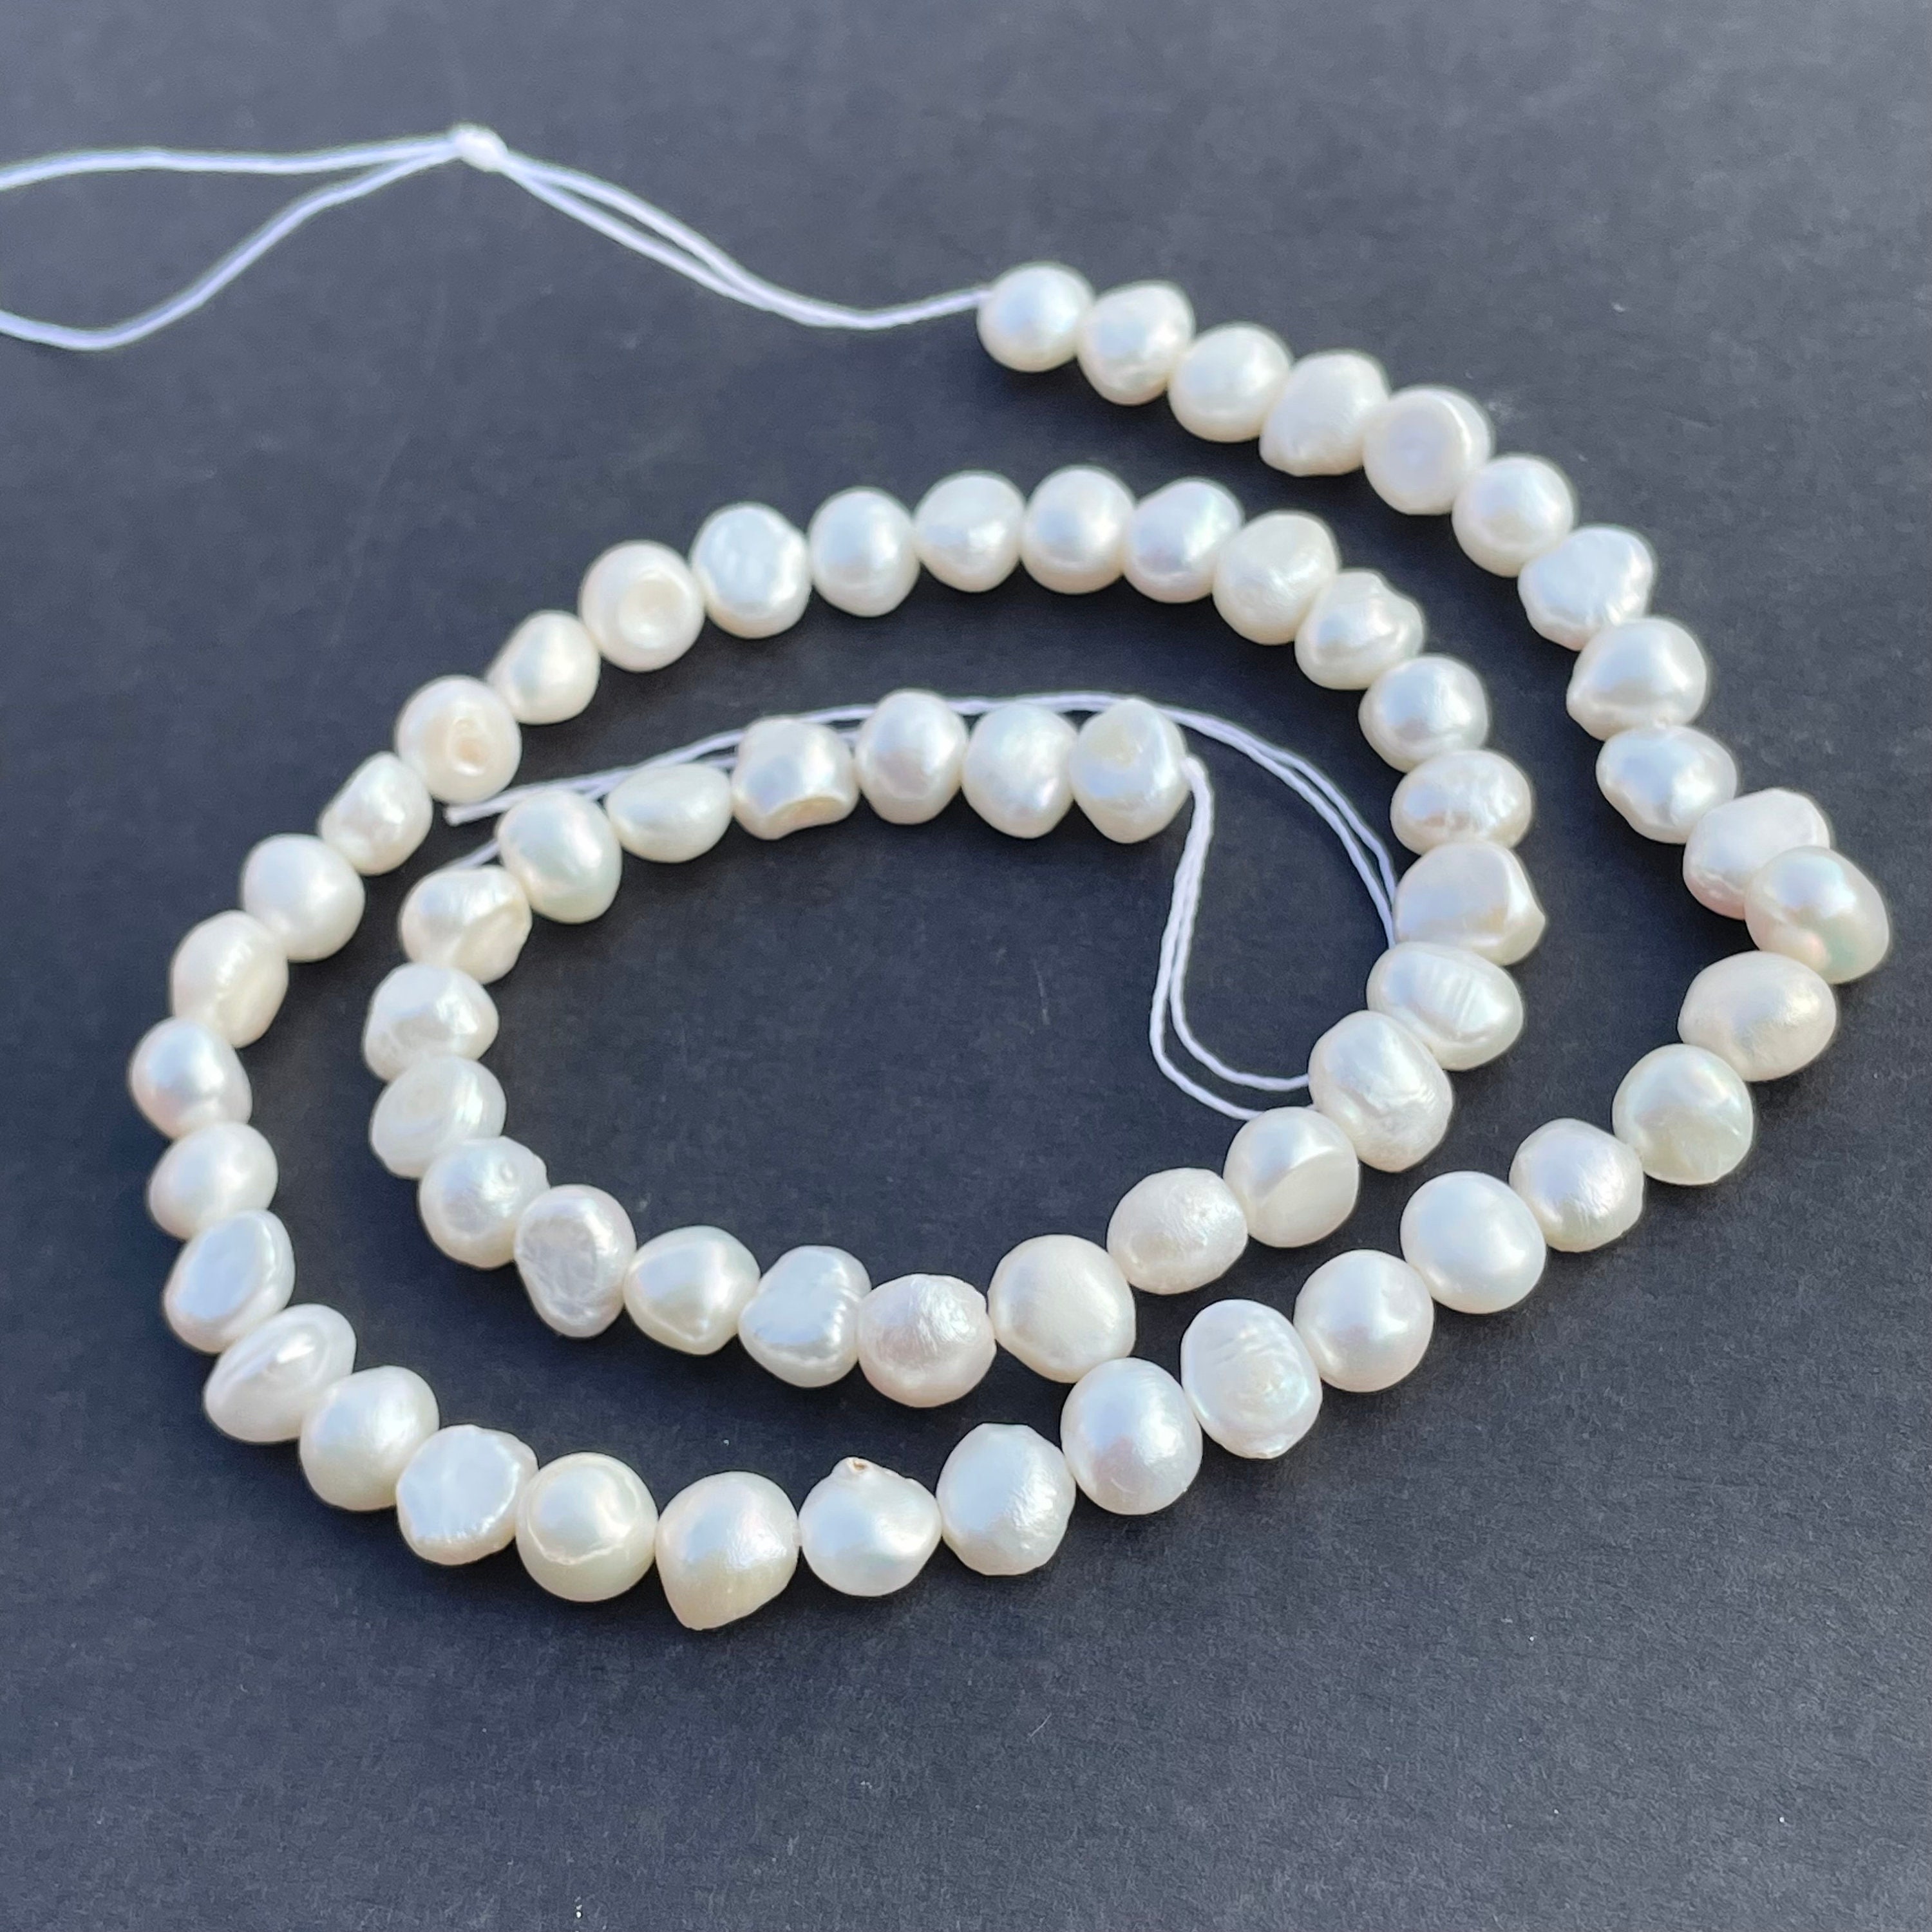 3mm-10mm Natural White Pearls Beads Irregular Freshwater Pearl Spacer Beads  for Jewelry Making Diy Bracelet Necklace